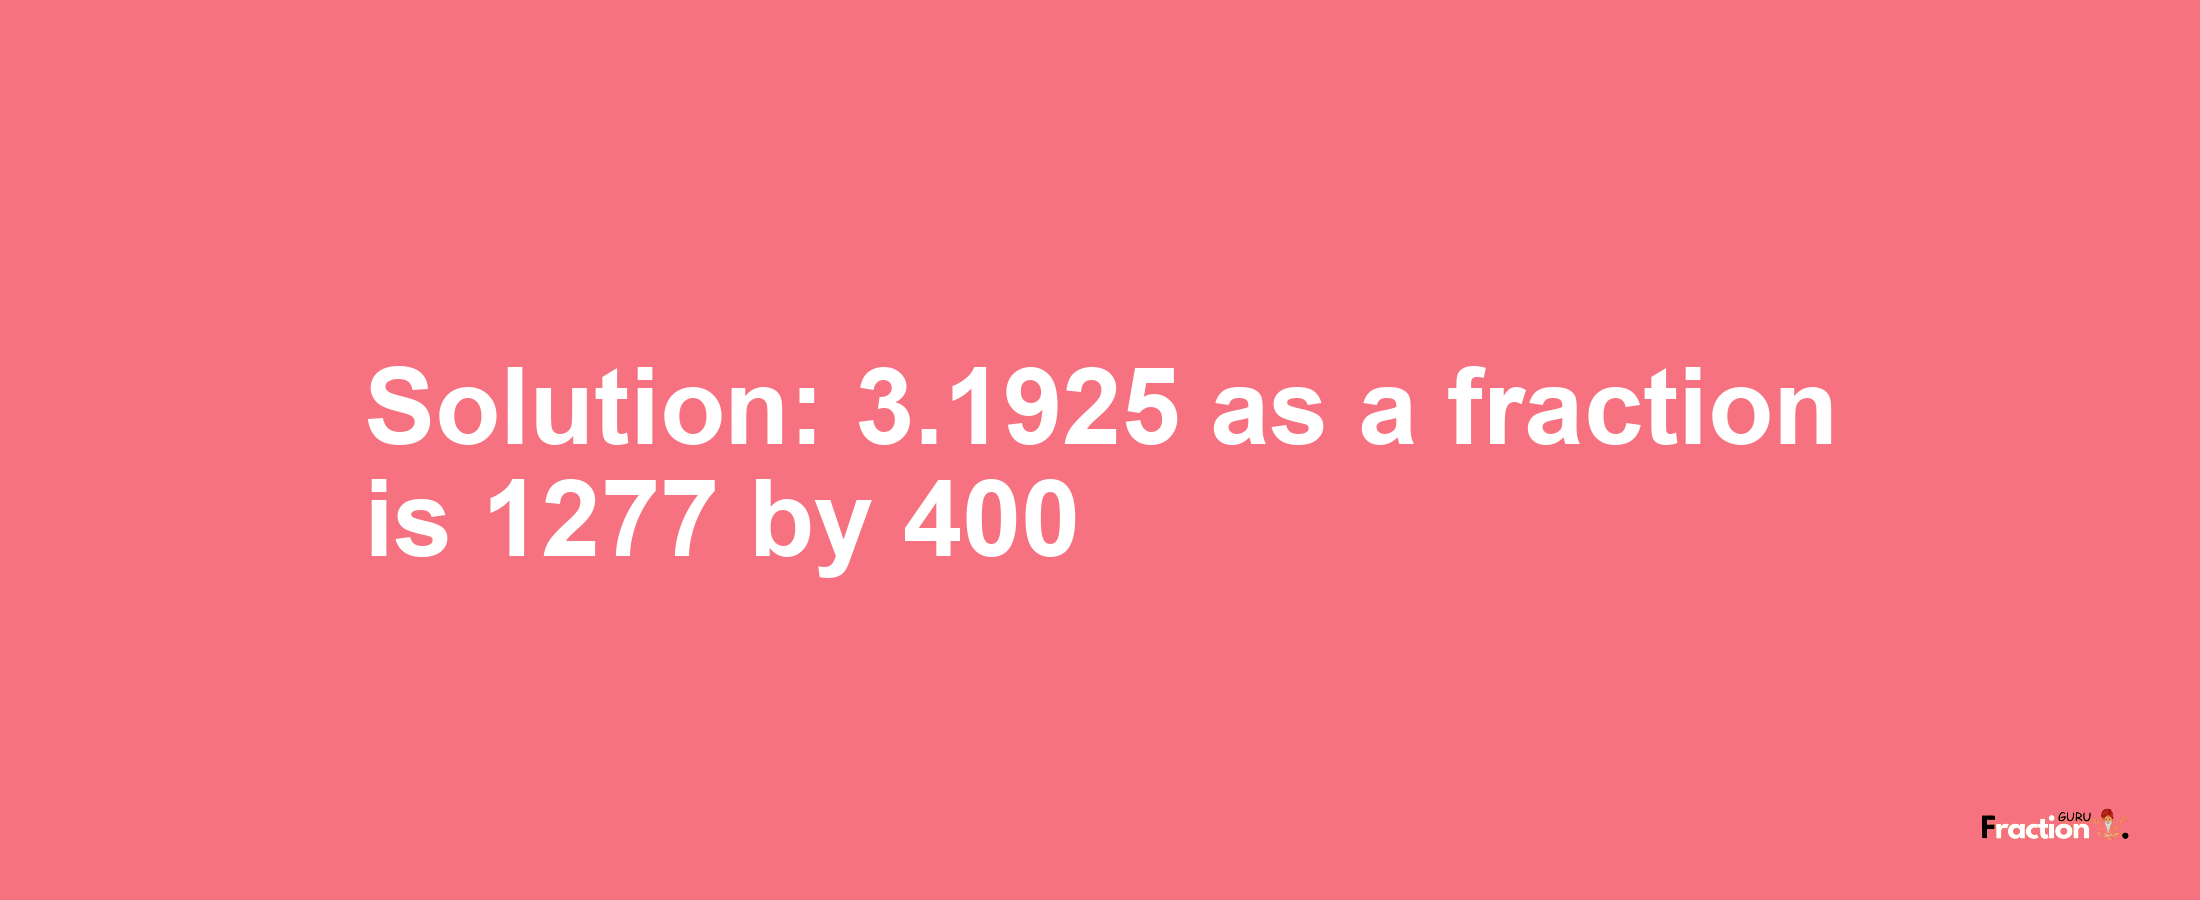 Solution:3.1925 as a fraction is 1277/400